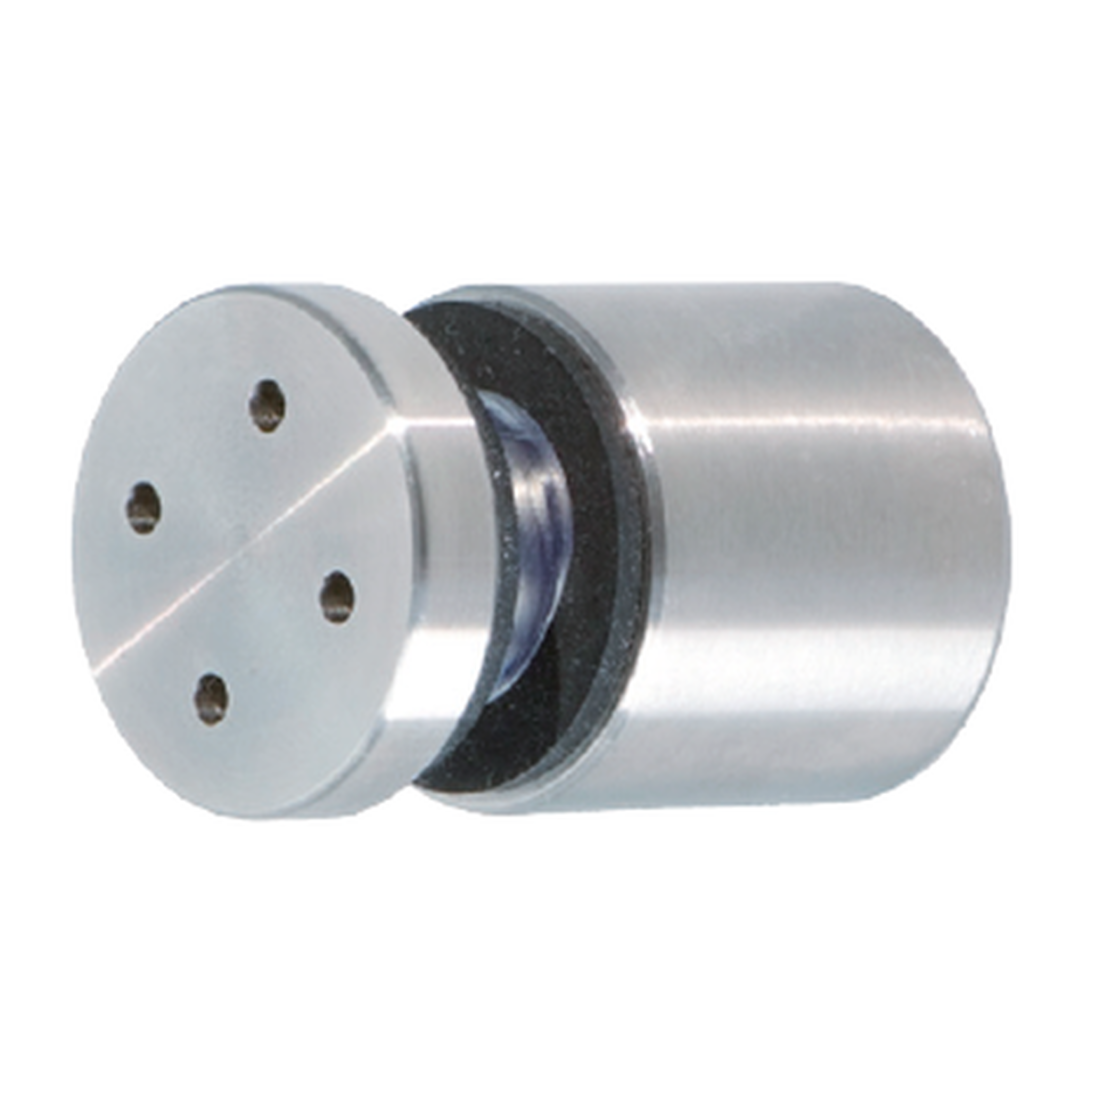 Distance holder 4-hole optic for plate thickness 6-10mm